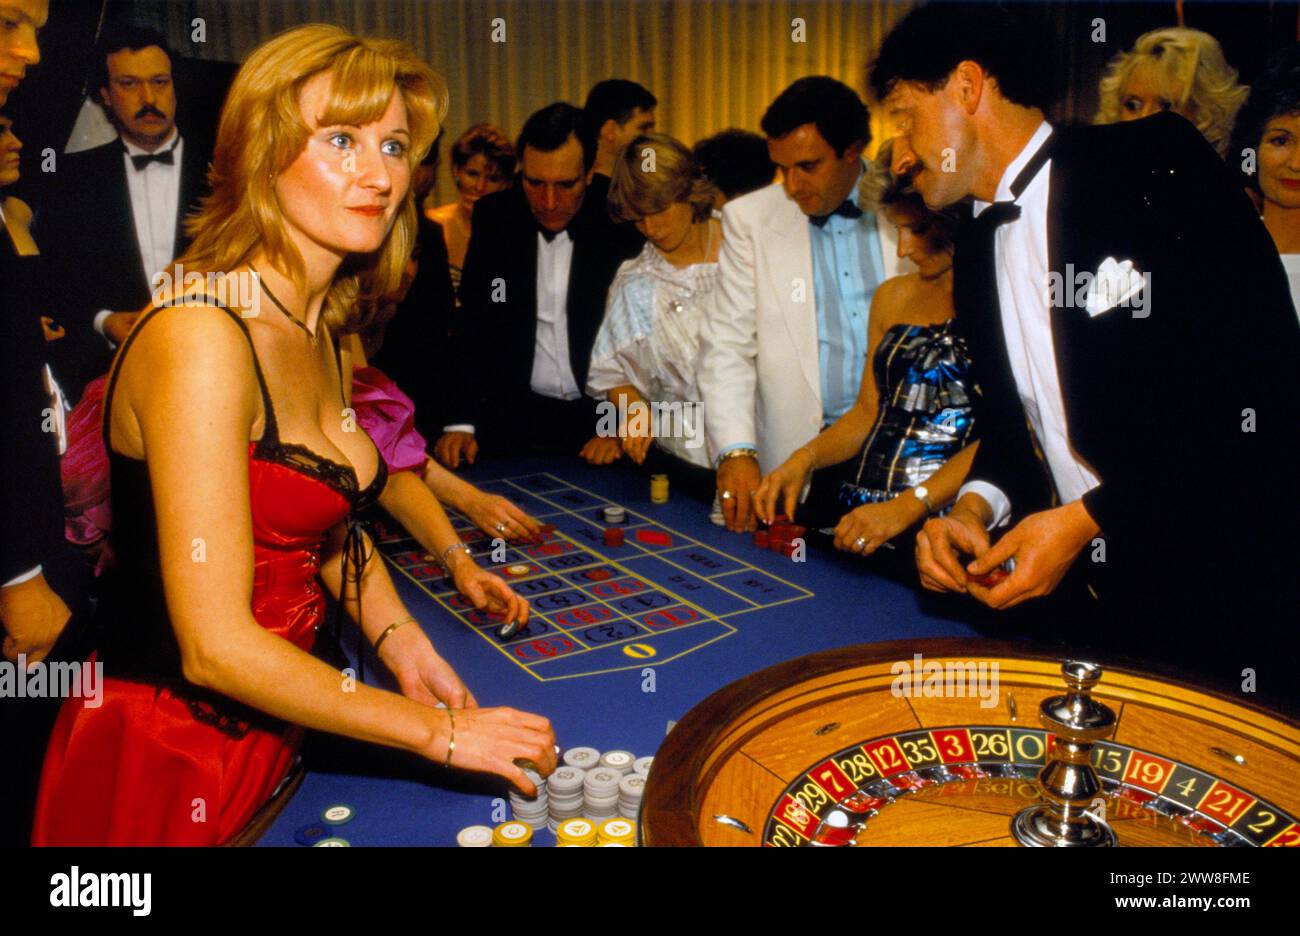 Female croupier, wearing a burlesque corset basque people playing roulette, gambling in Britain, at the annual  SPARKS charity ball at the Hilton Hotel. London, England circa December 1992. 1990s UK HOMER SYKESotel. Stock Photo